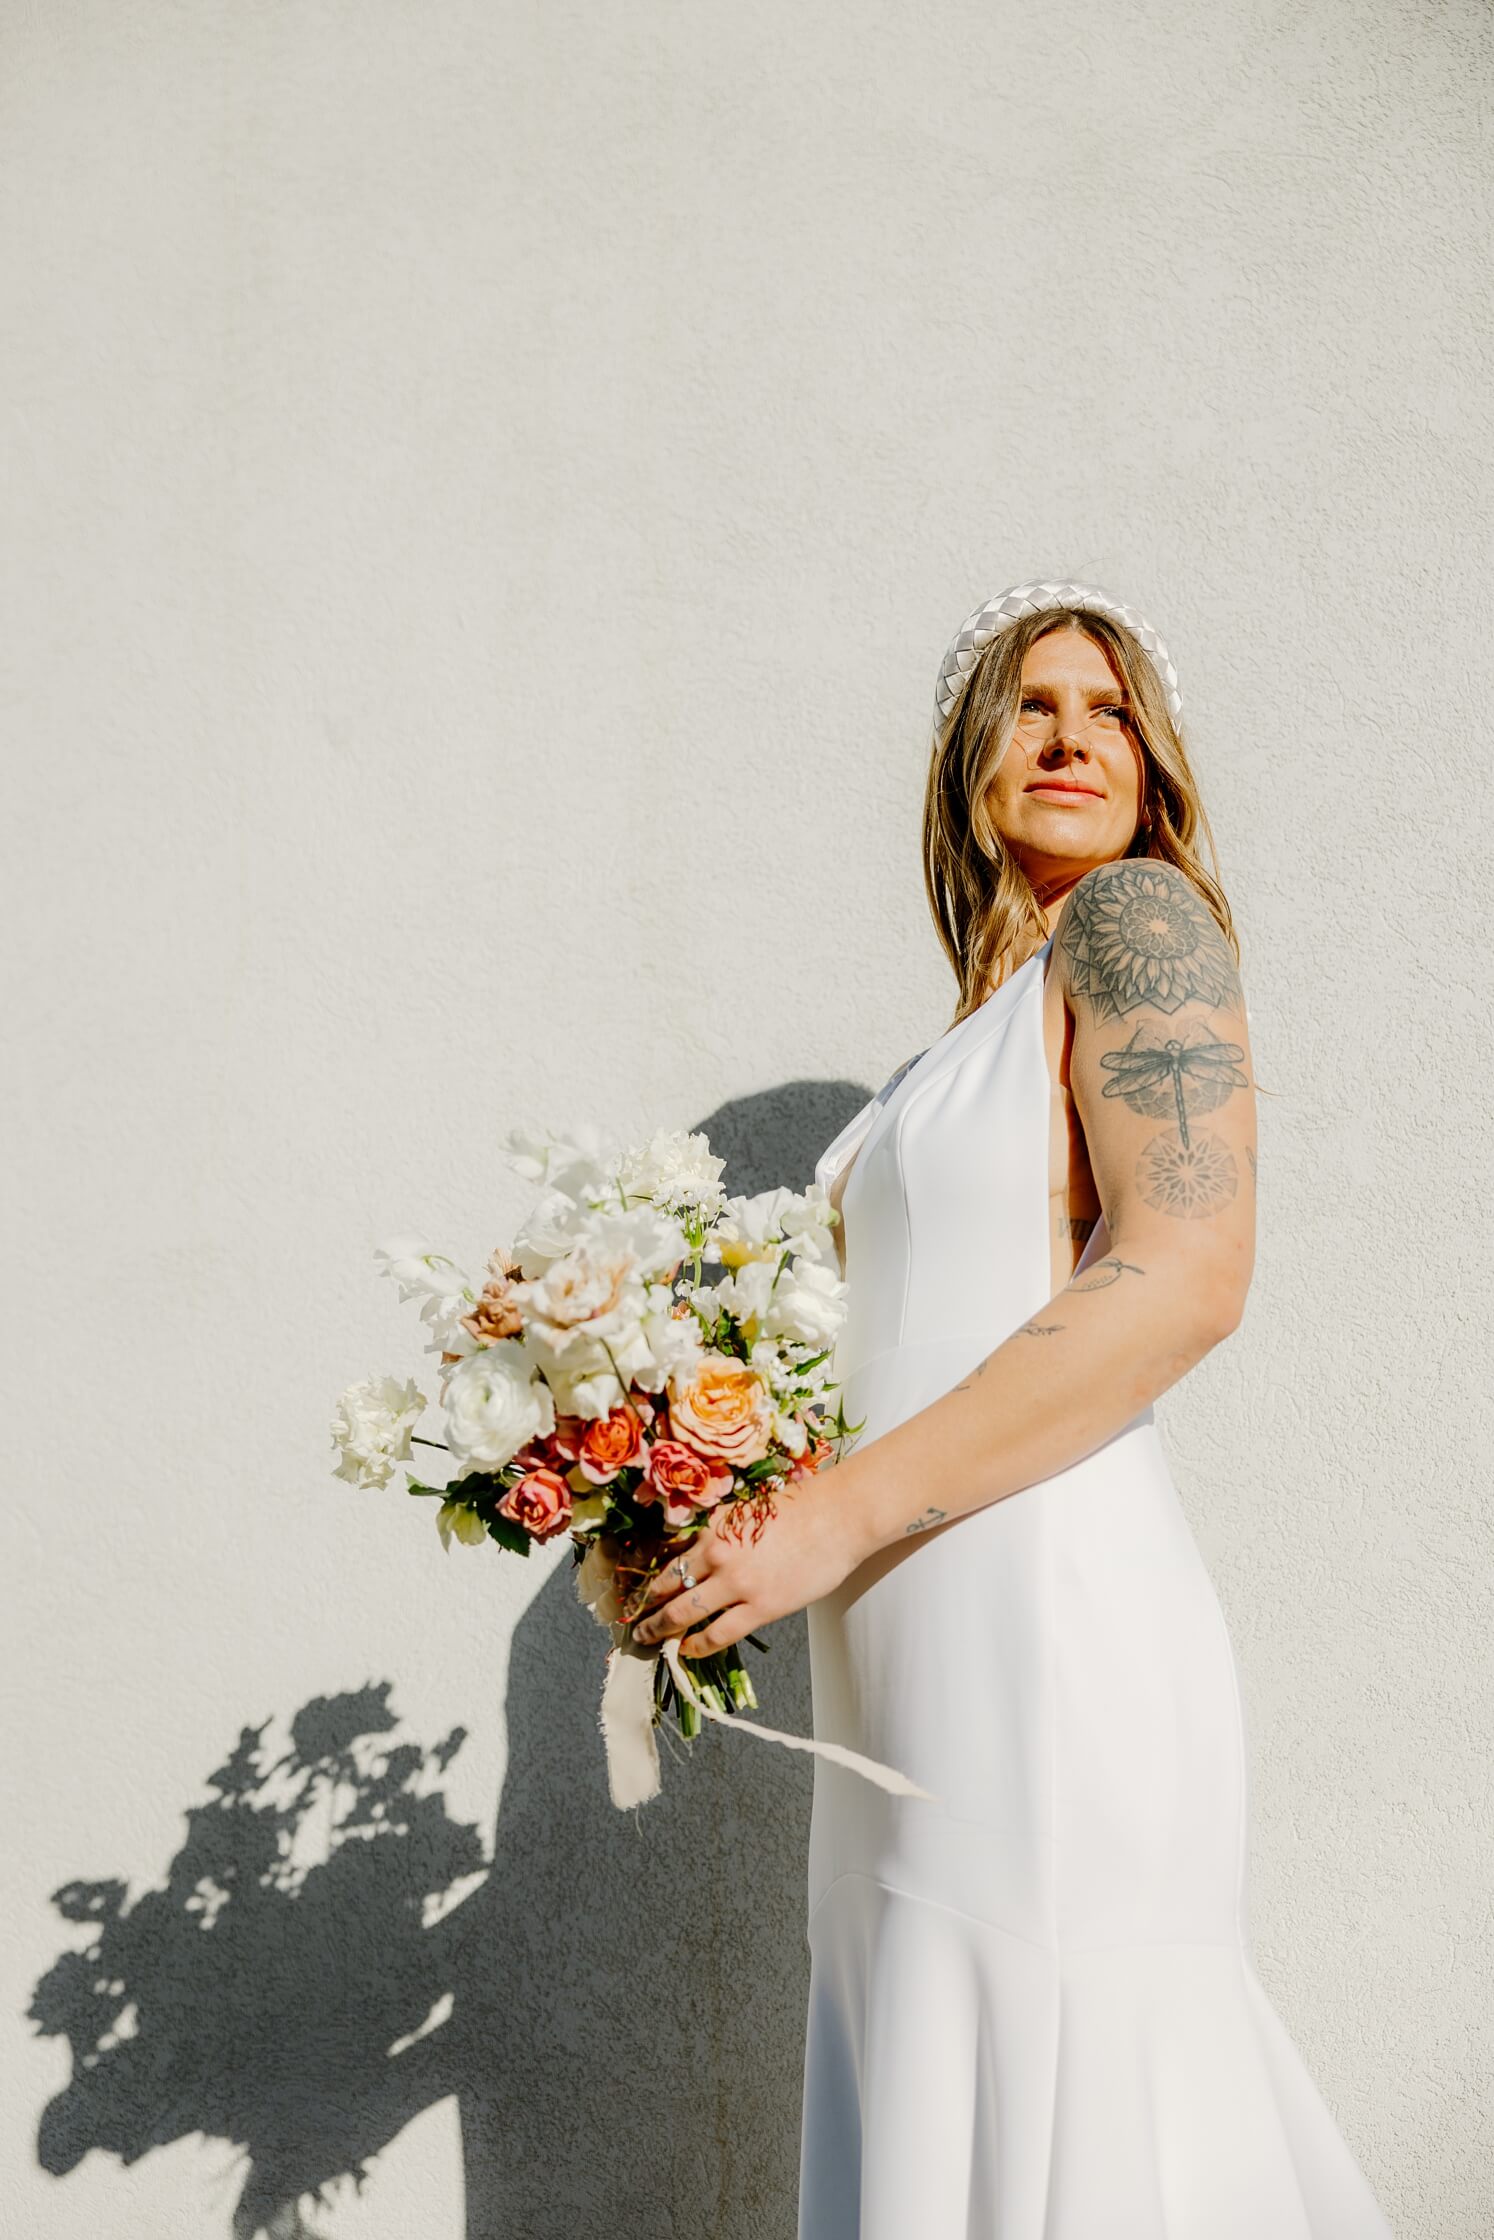 Bride looking off into the distance holding bouquet | McArthur Weddings and Events